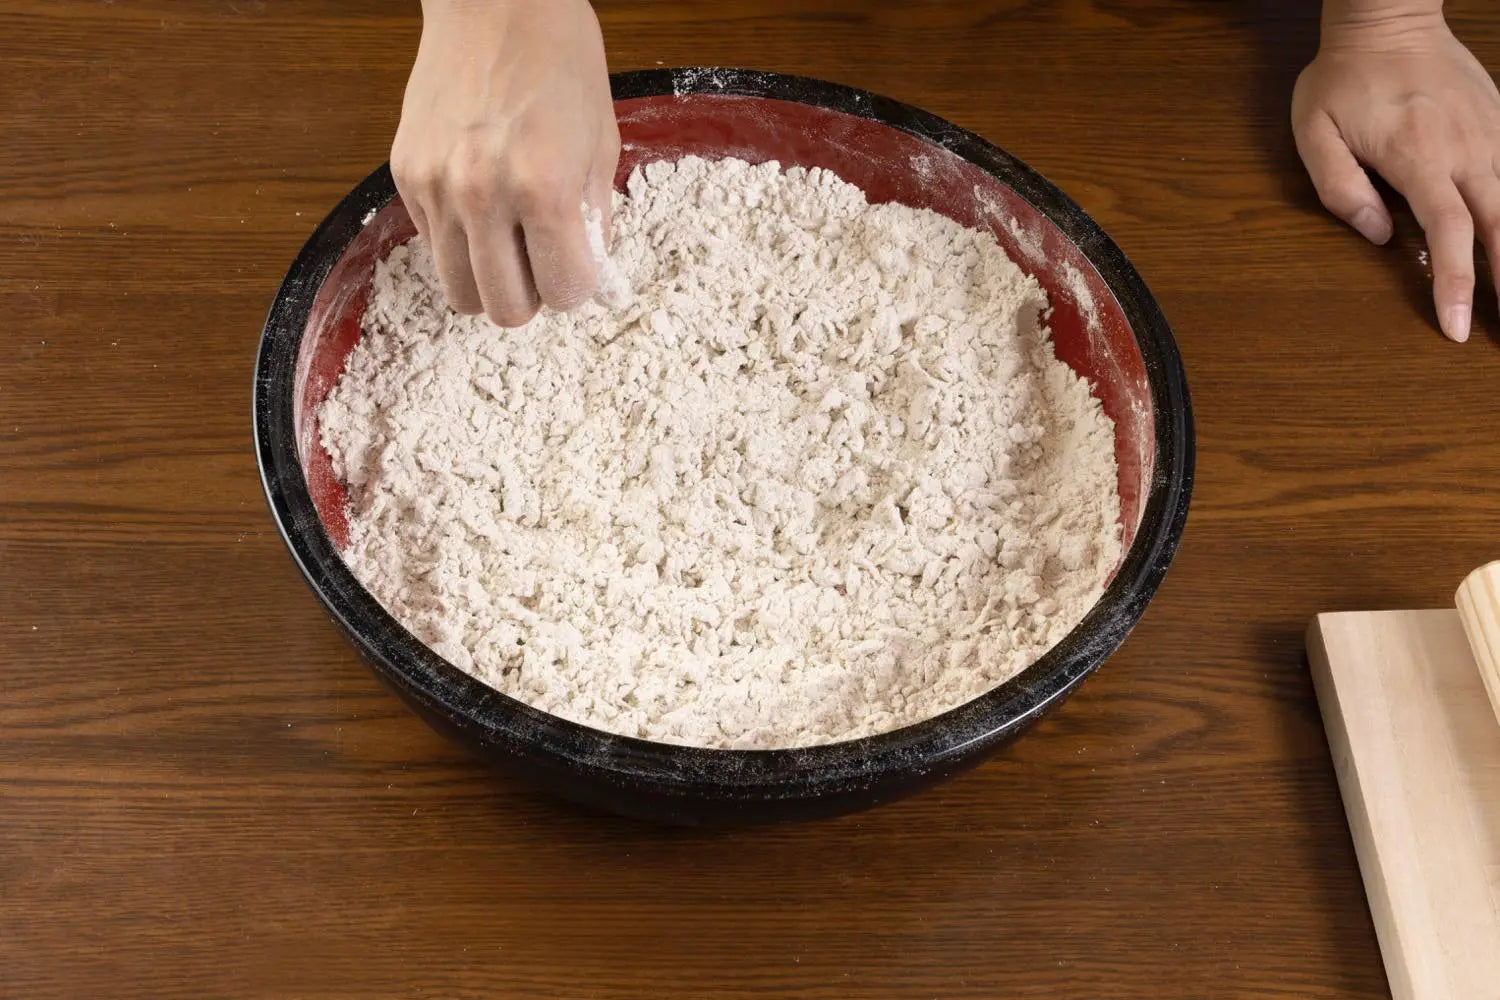 Slowly mixing water into flour mixture